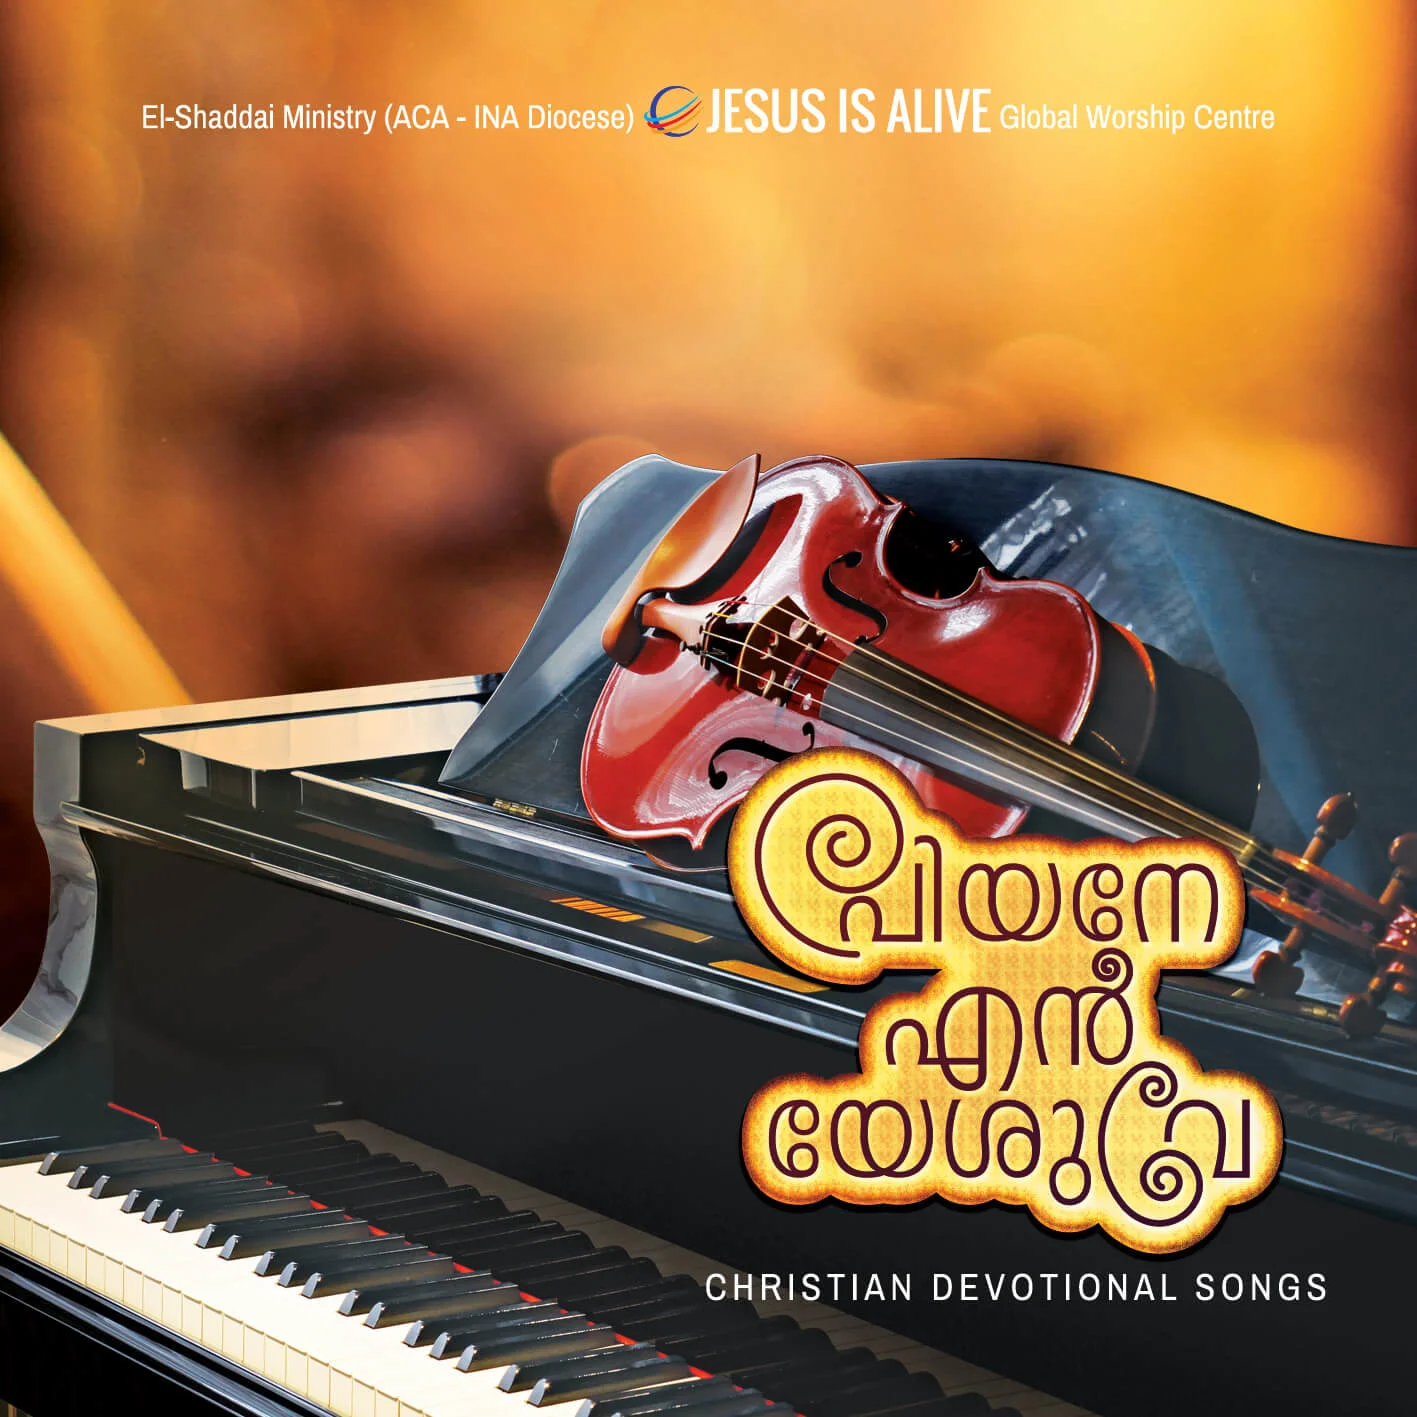 Malayalam Christian Devotional Song CD Cover and Artwork Design